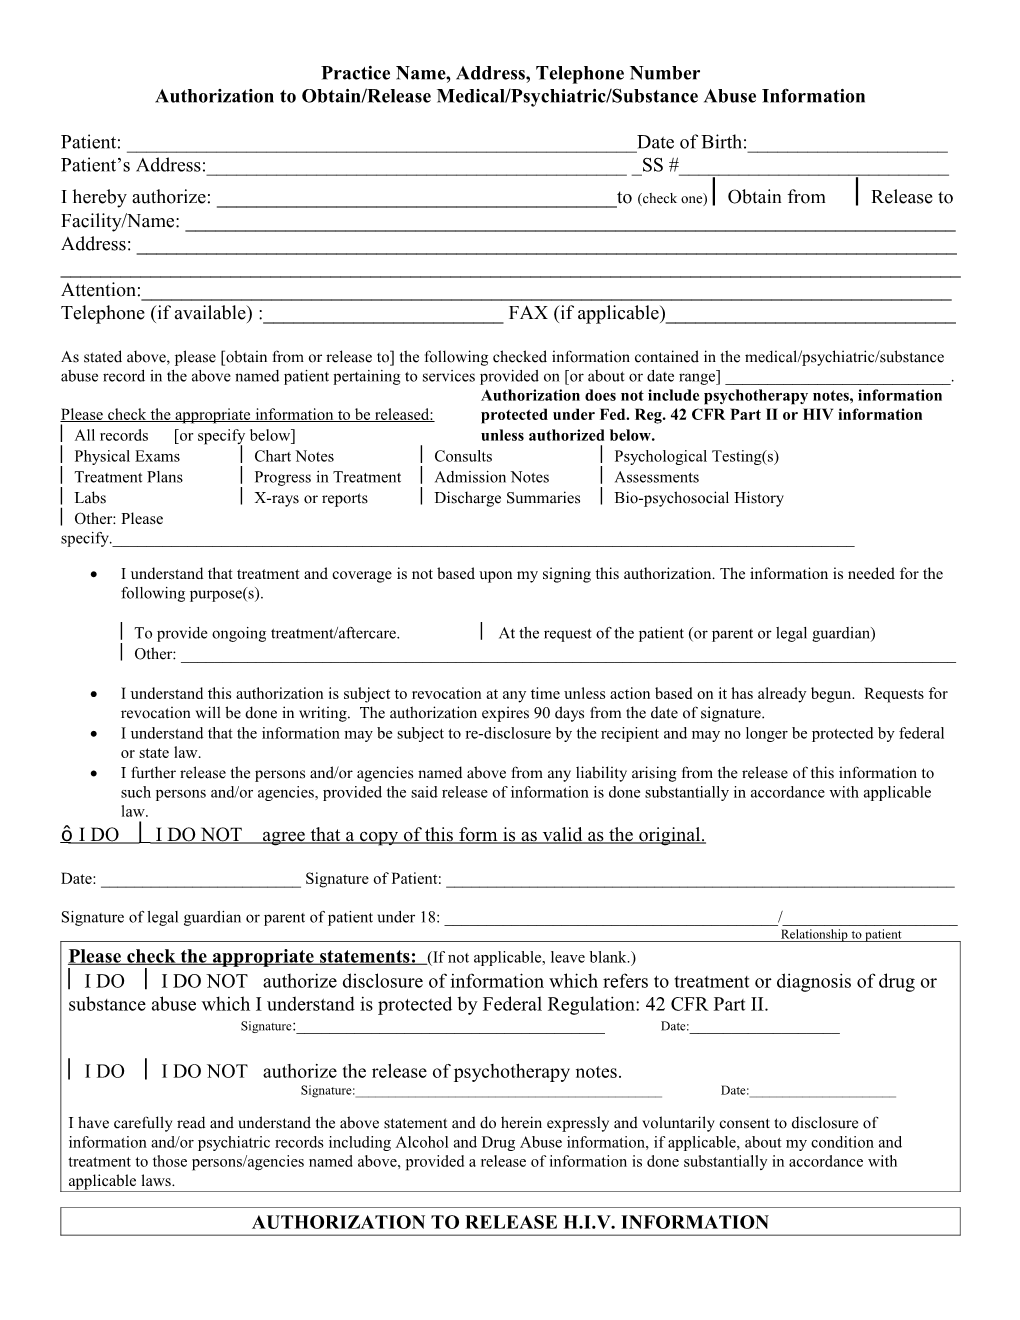 Authorization to Obtain/Release Medical/Psychiatric/Substance Abuse Information